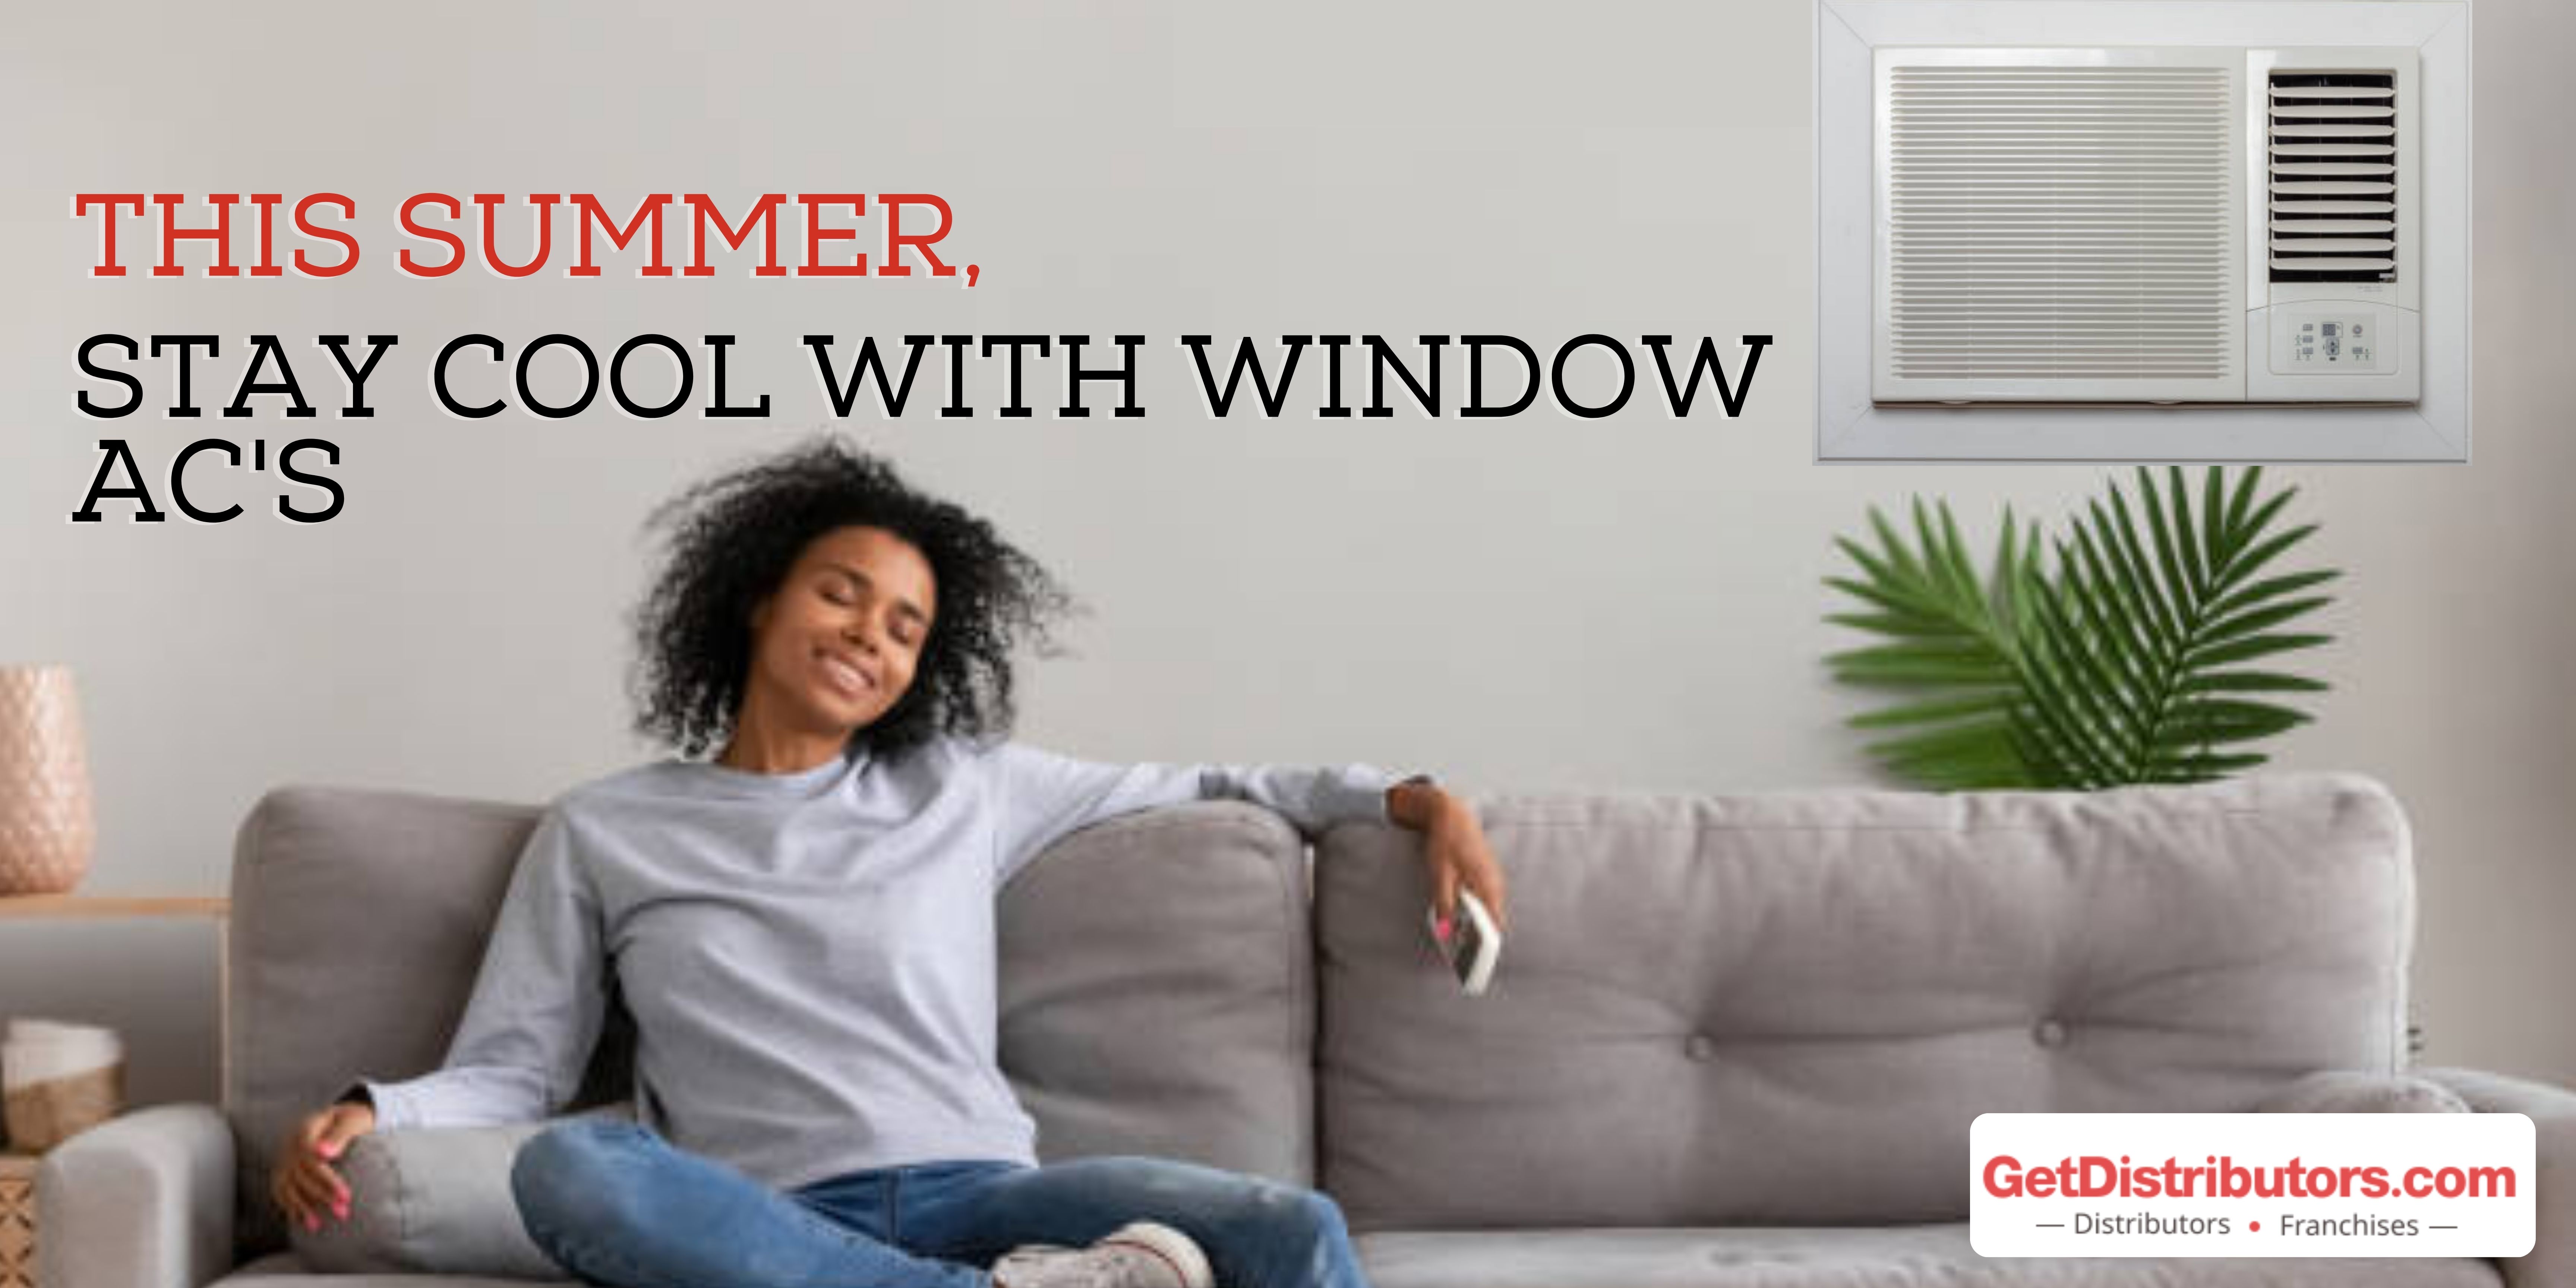 This summer, stay cool with window ACs